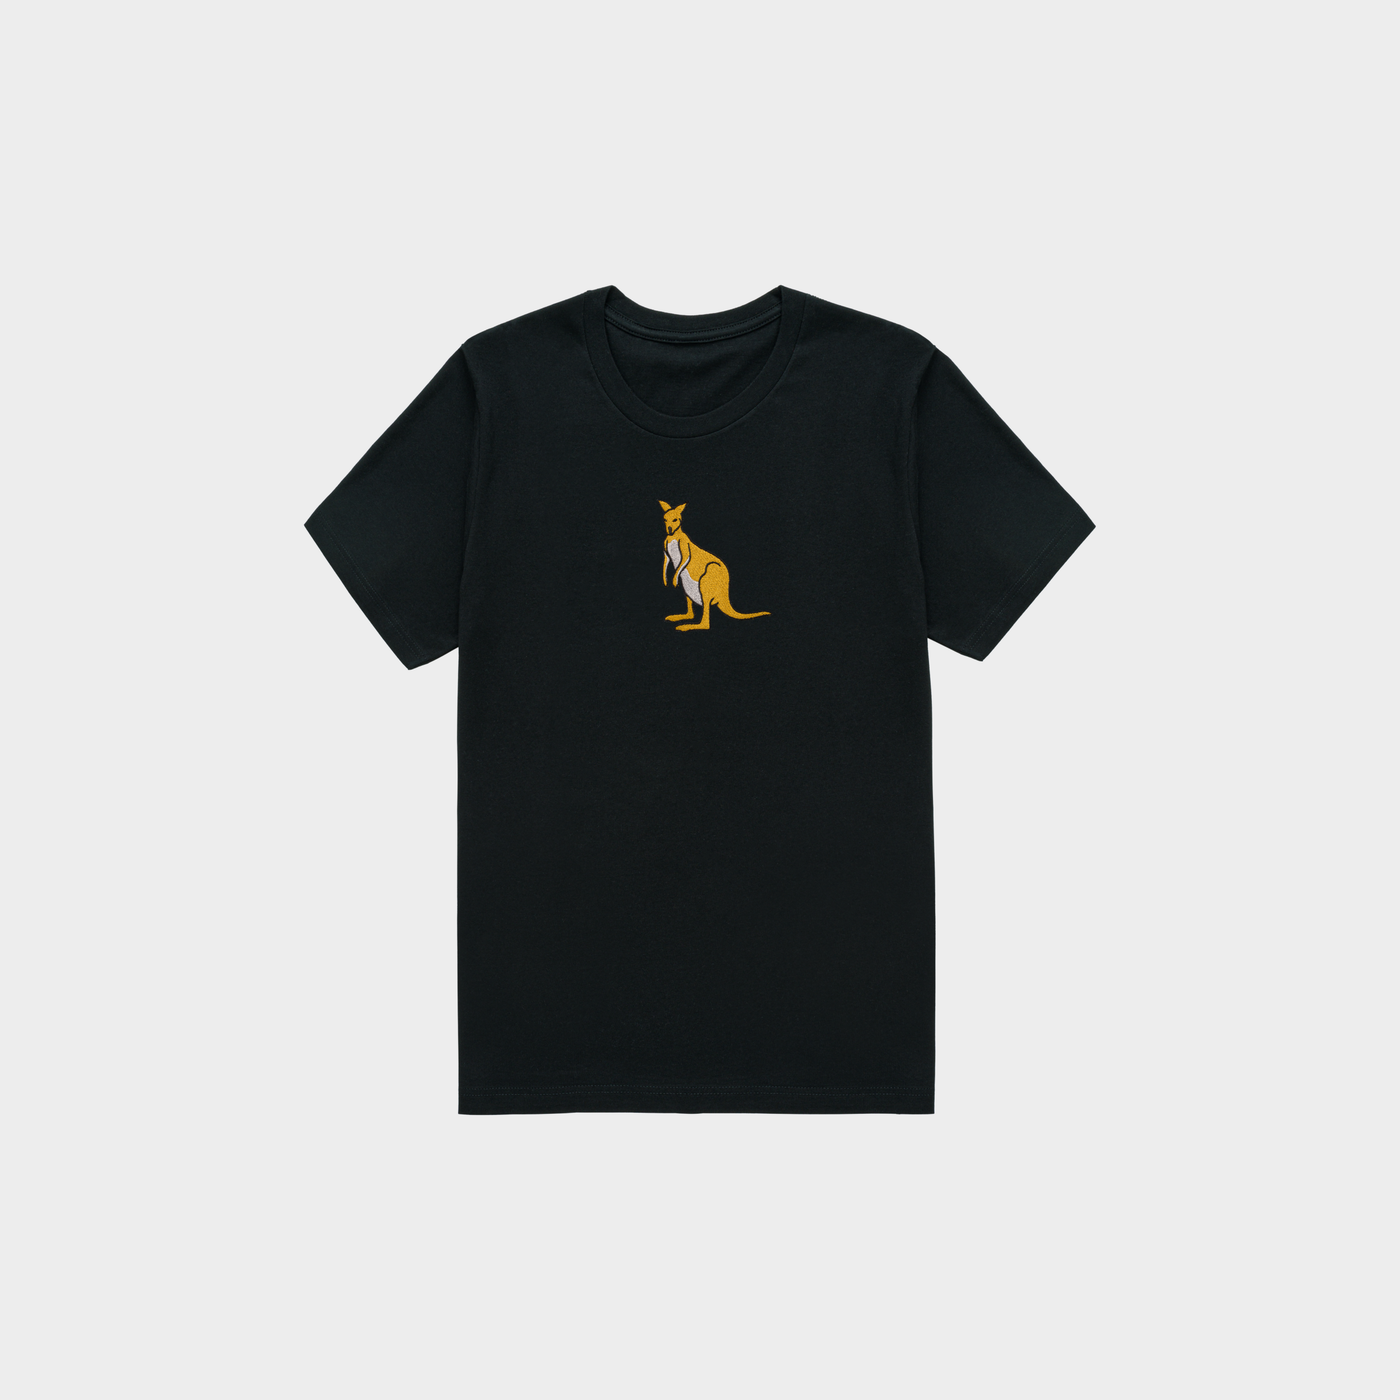 Bobby's Planet Kids Embroidered Kangaroo T-Shirt from Australia Down Under Animals Collection in Black Color#color_black